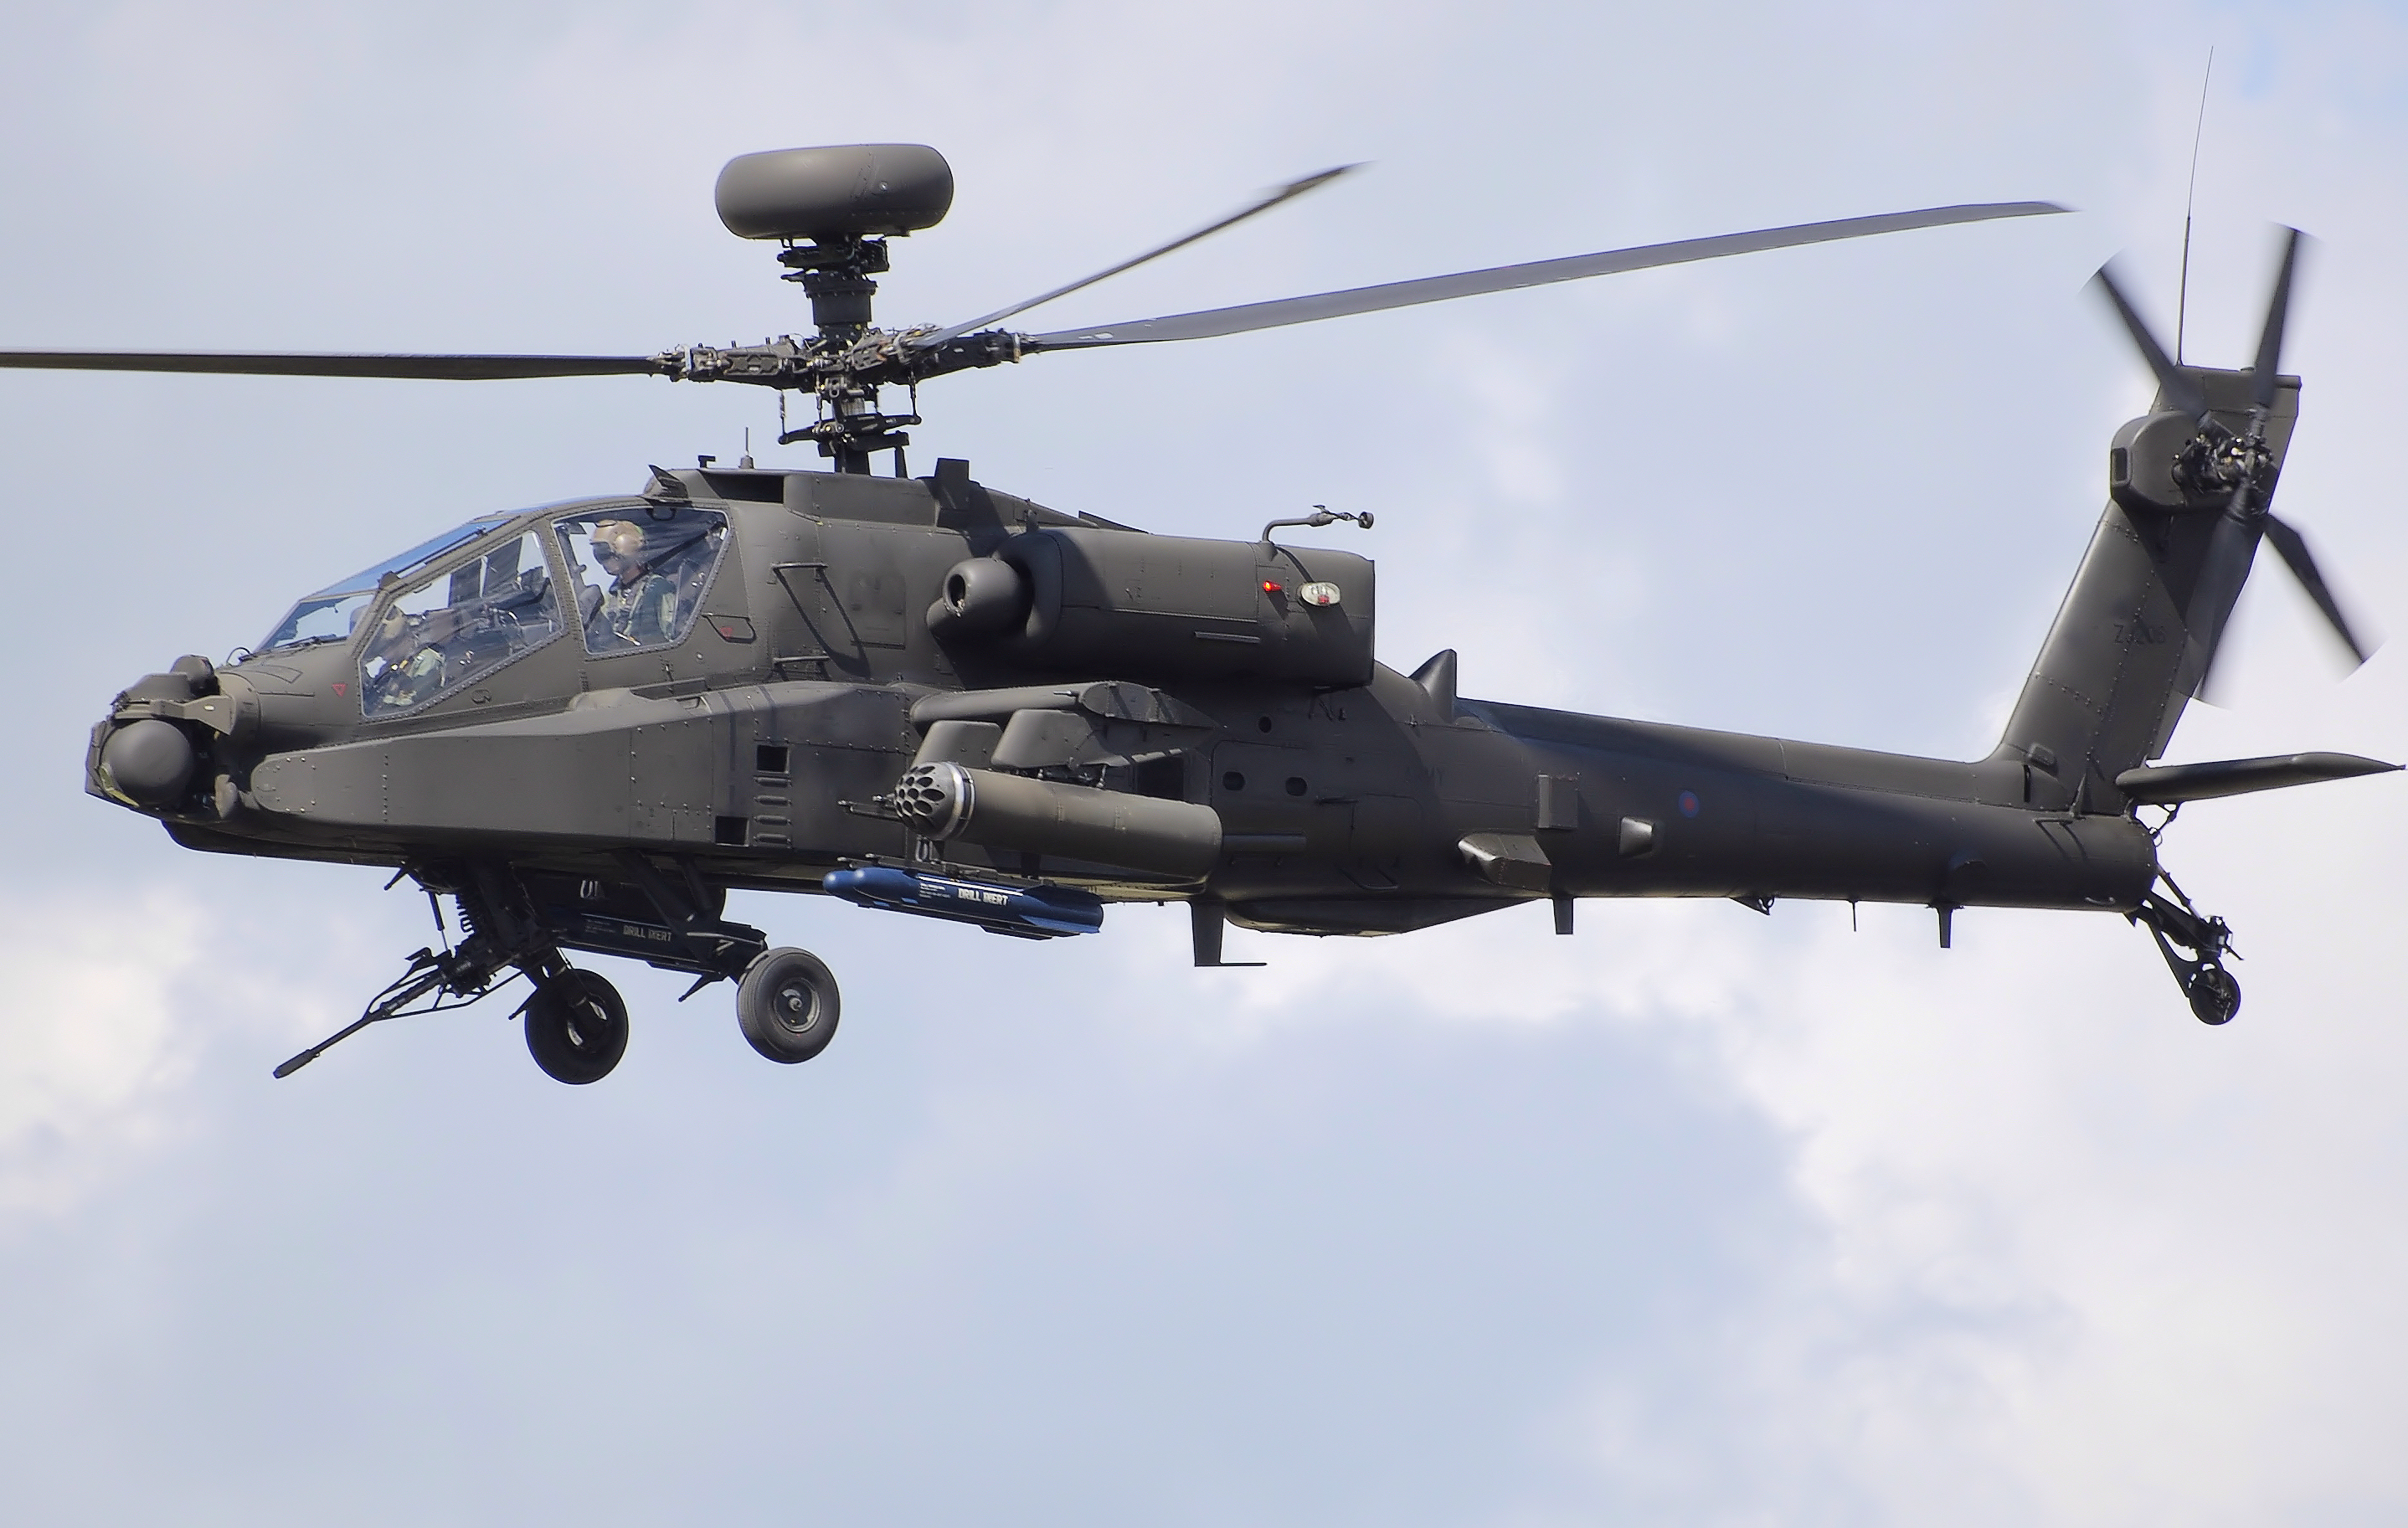                       'Apache-Longbow AH-64D' 
India's_future_prospect_ATTACK_HELICOPTER_GUNSHIP 'Apache-Longbow AH-64D' Boeing_USA 